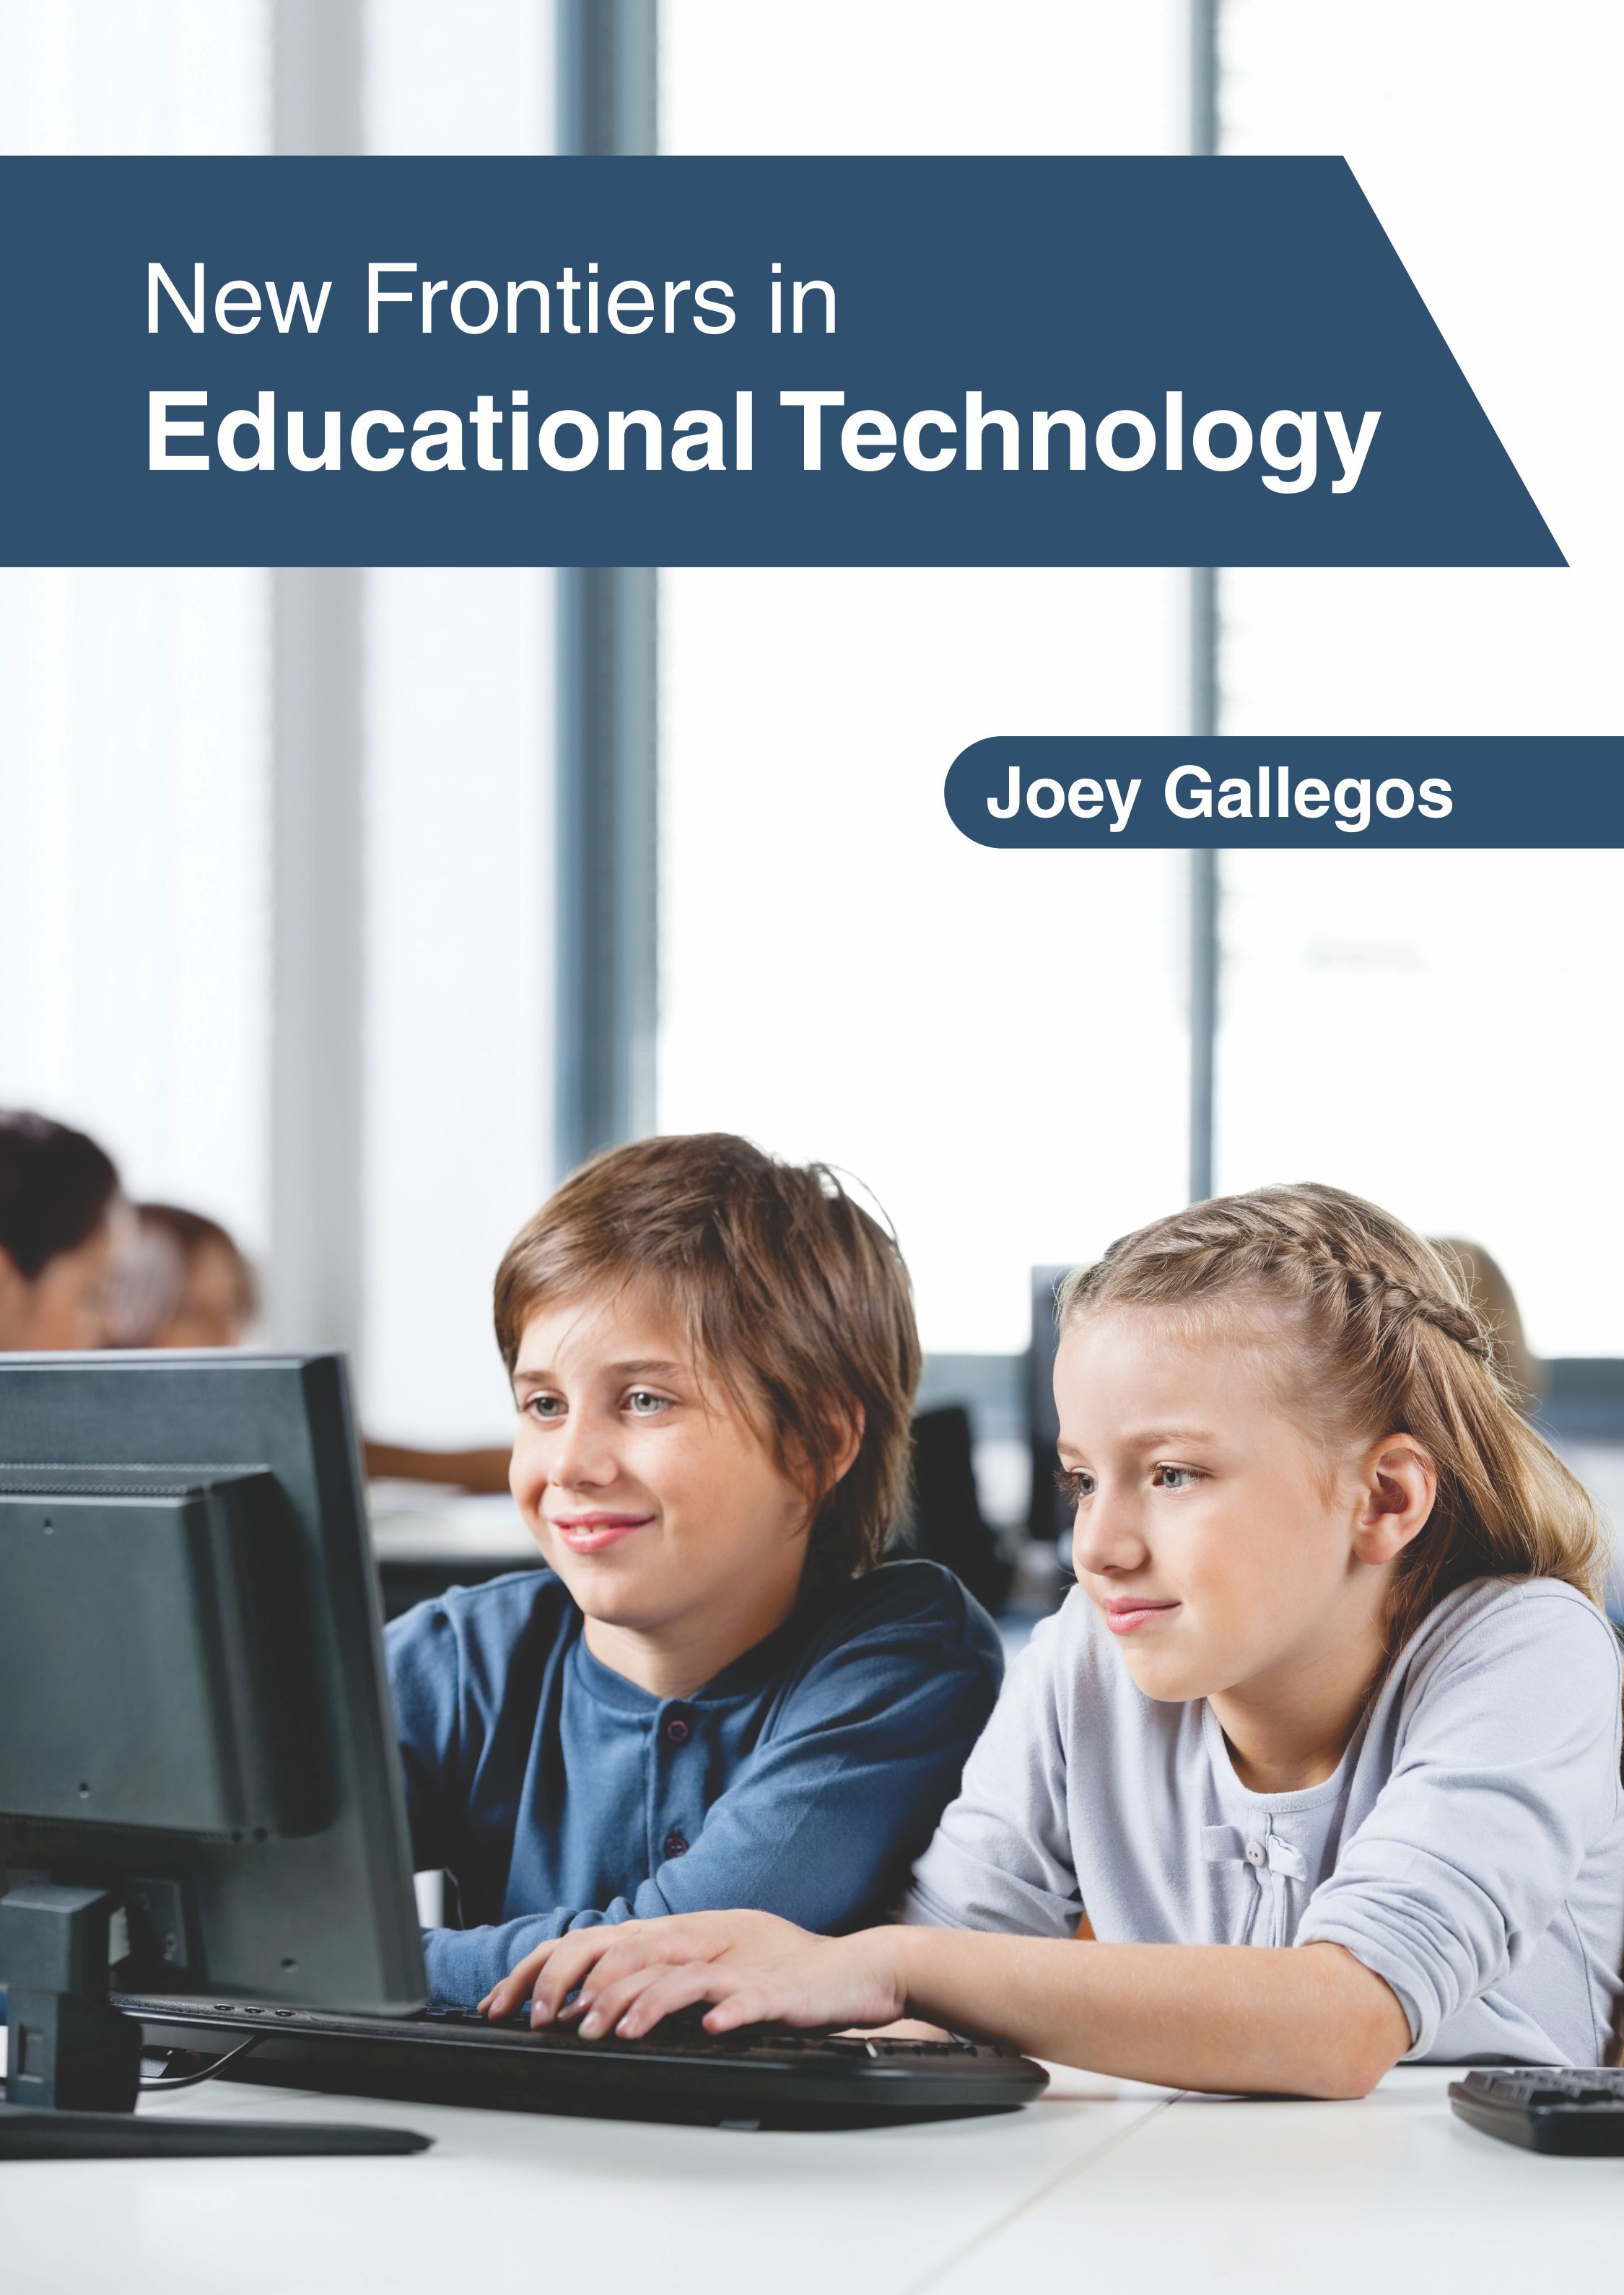 New Frontiers in Educational Technology